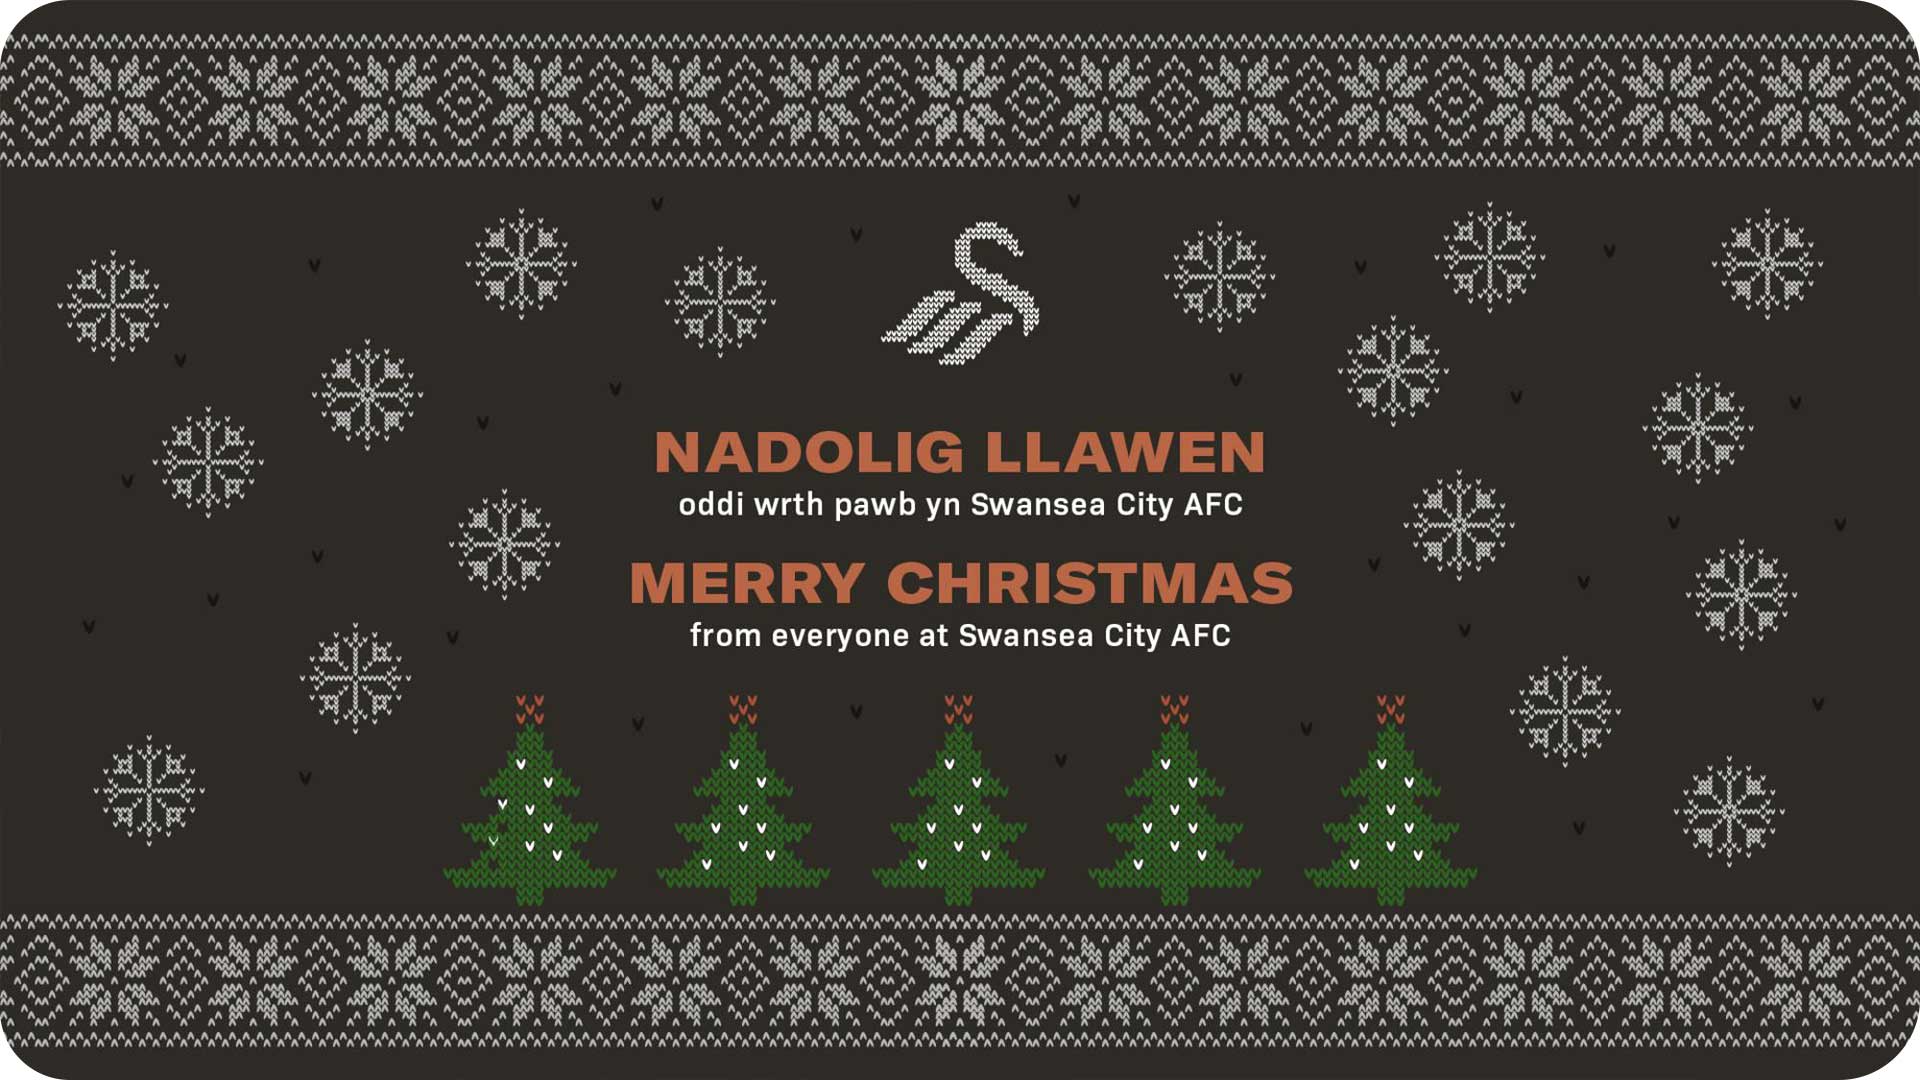 Merry Christmas from everyone at Swansea City AFC